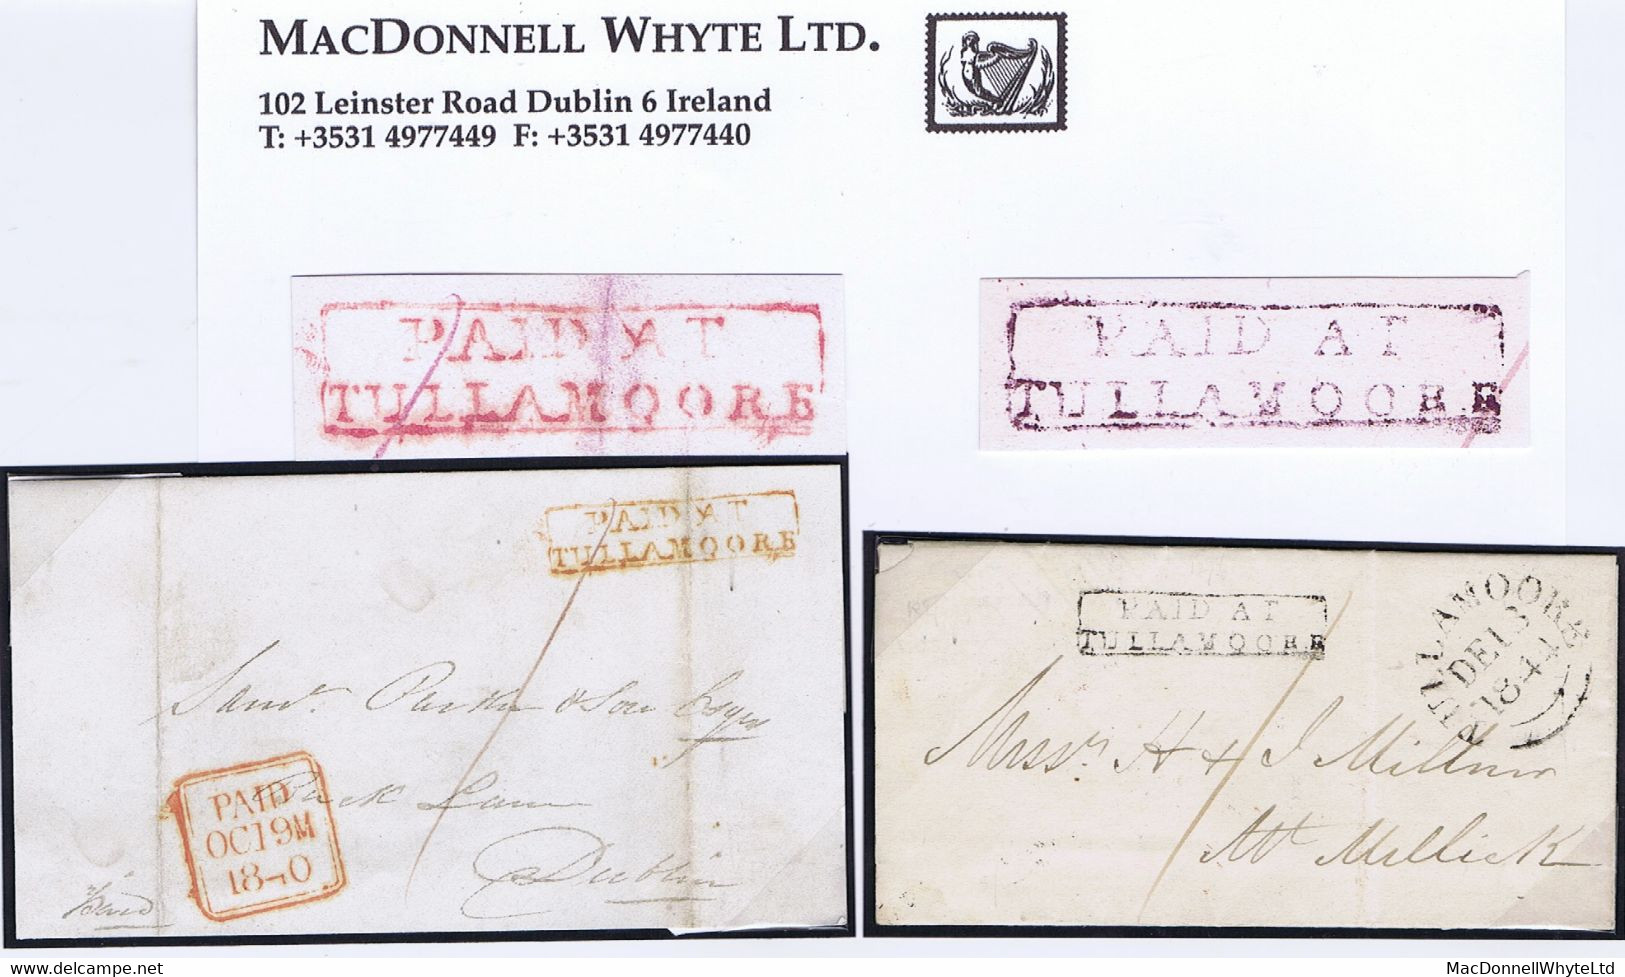 Ireland Offaly Uniform Penny Post Boxed PAID AT/TULLAMORE In Red 1840 And In Black 1844 On Front Or Cover - Vorphilatelie